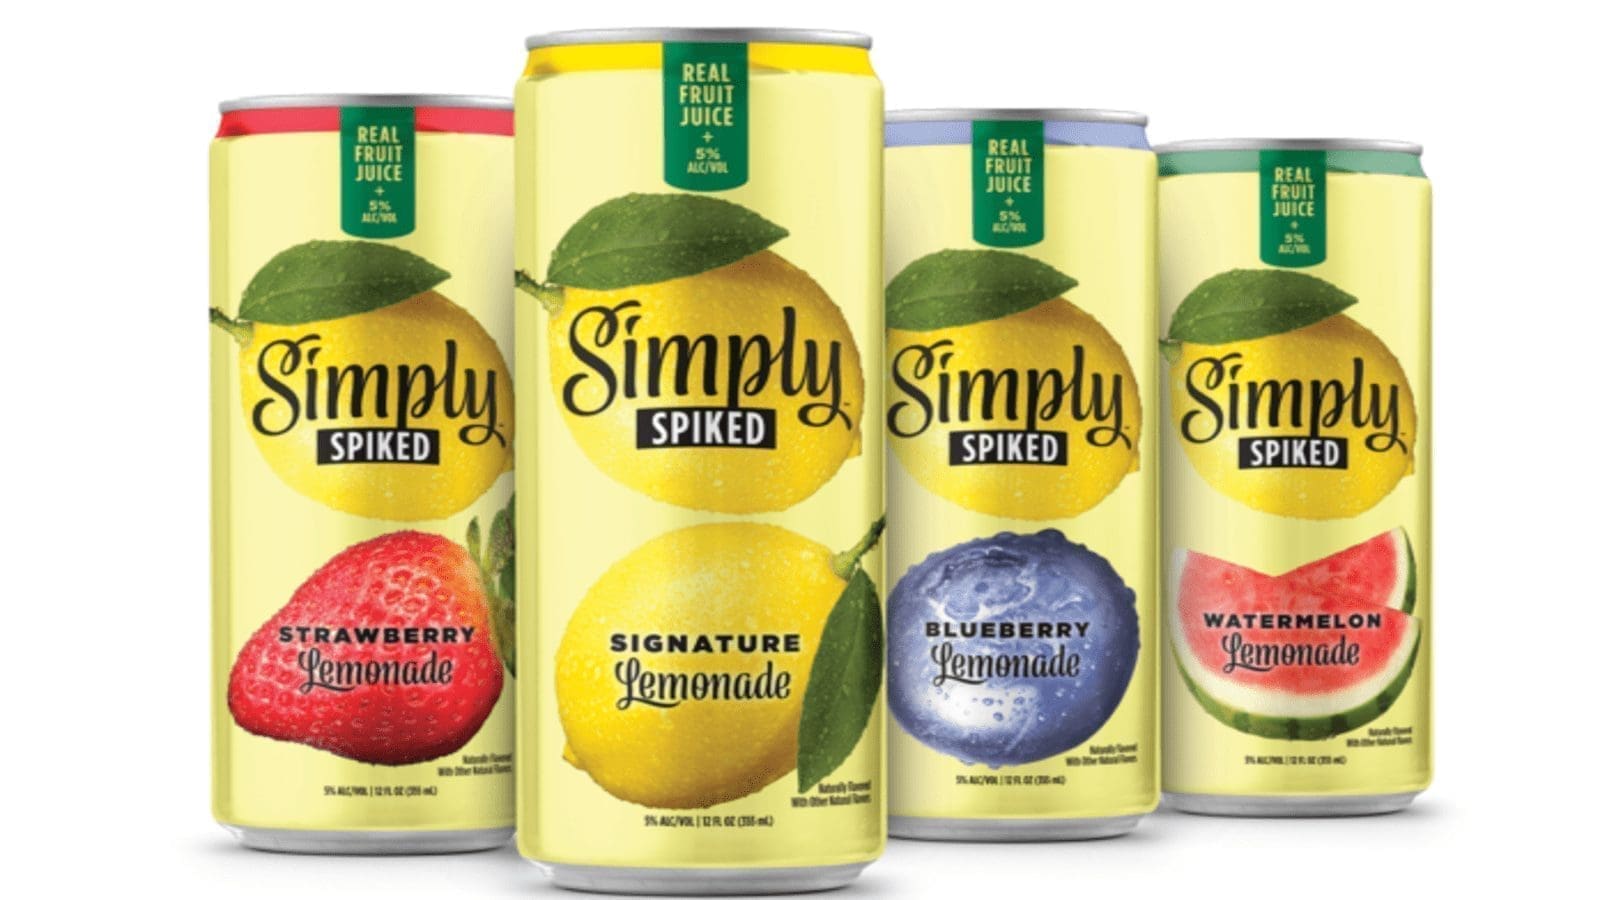 Coca-Cola partners Molson Coors to launch alcoholic version of Simply brand 